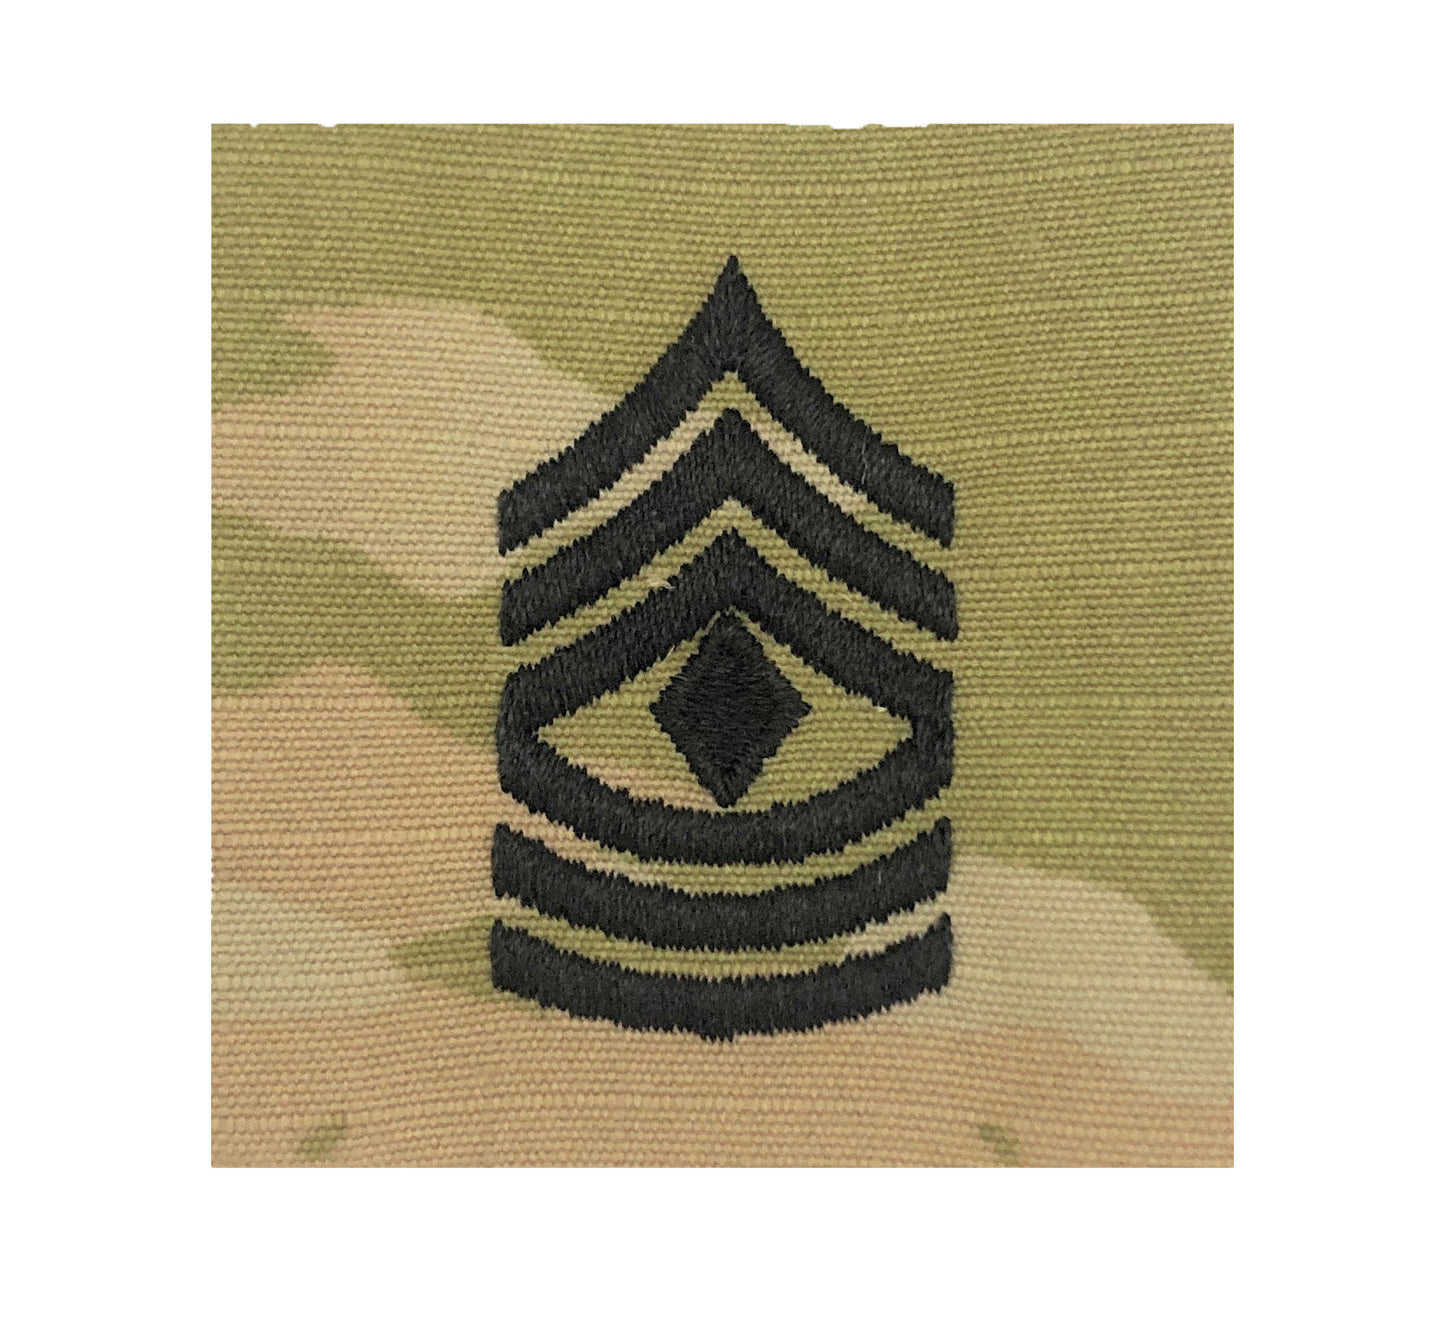 US Army E8 First Sergeant OCP 2x2 Sew-On Rank For Shirt,Jacket,Coat